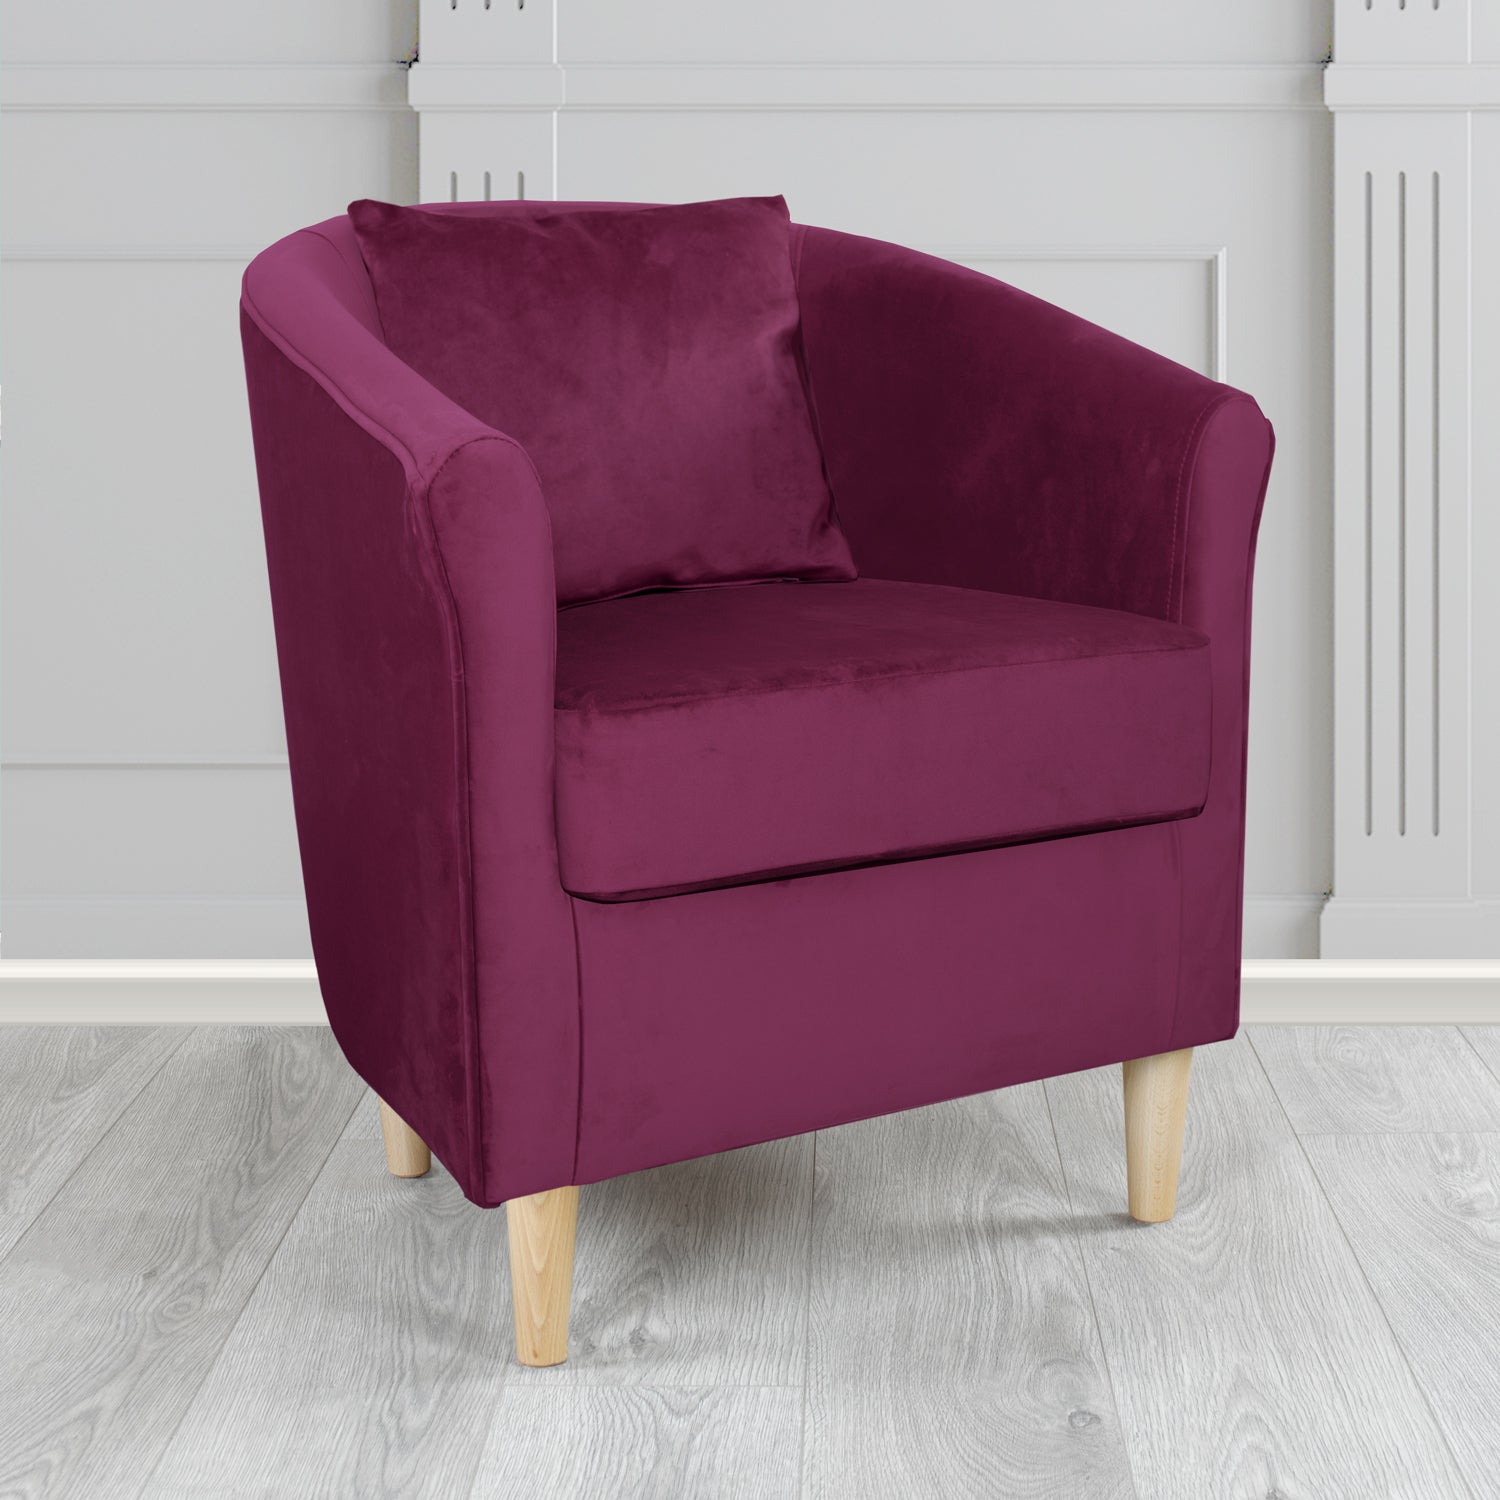 Express St Tropez Monaco Amethyst Plush Velvet Fabric Tub Chair with Scatter Cushion (6604803604522)